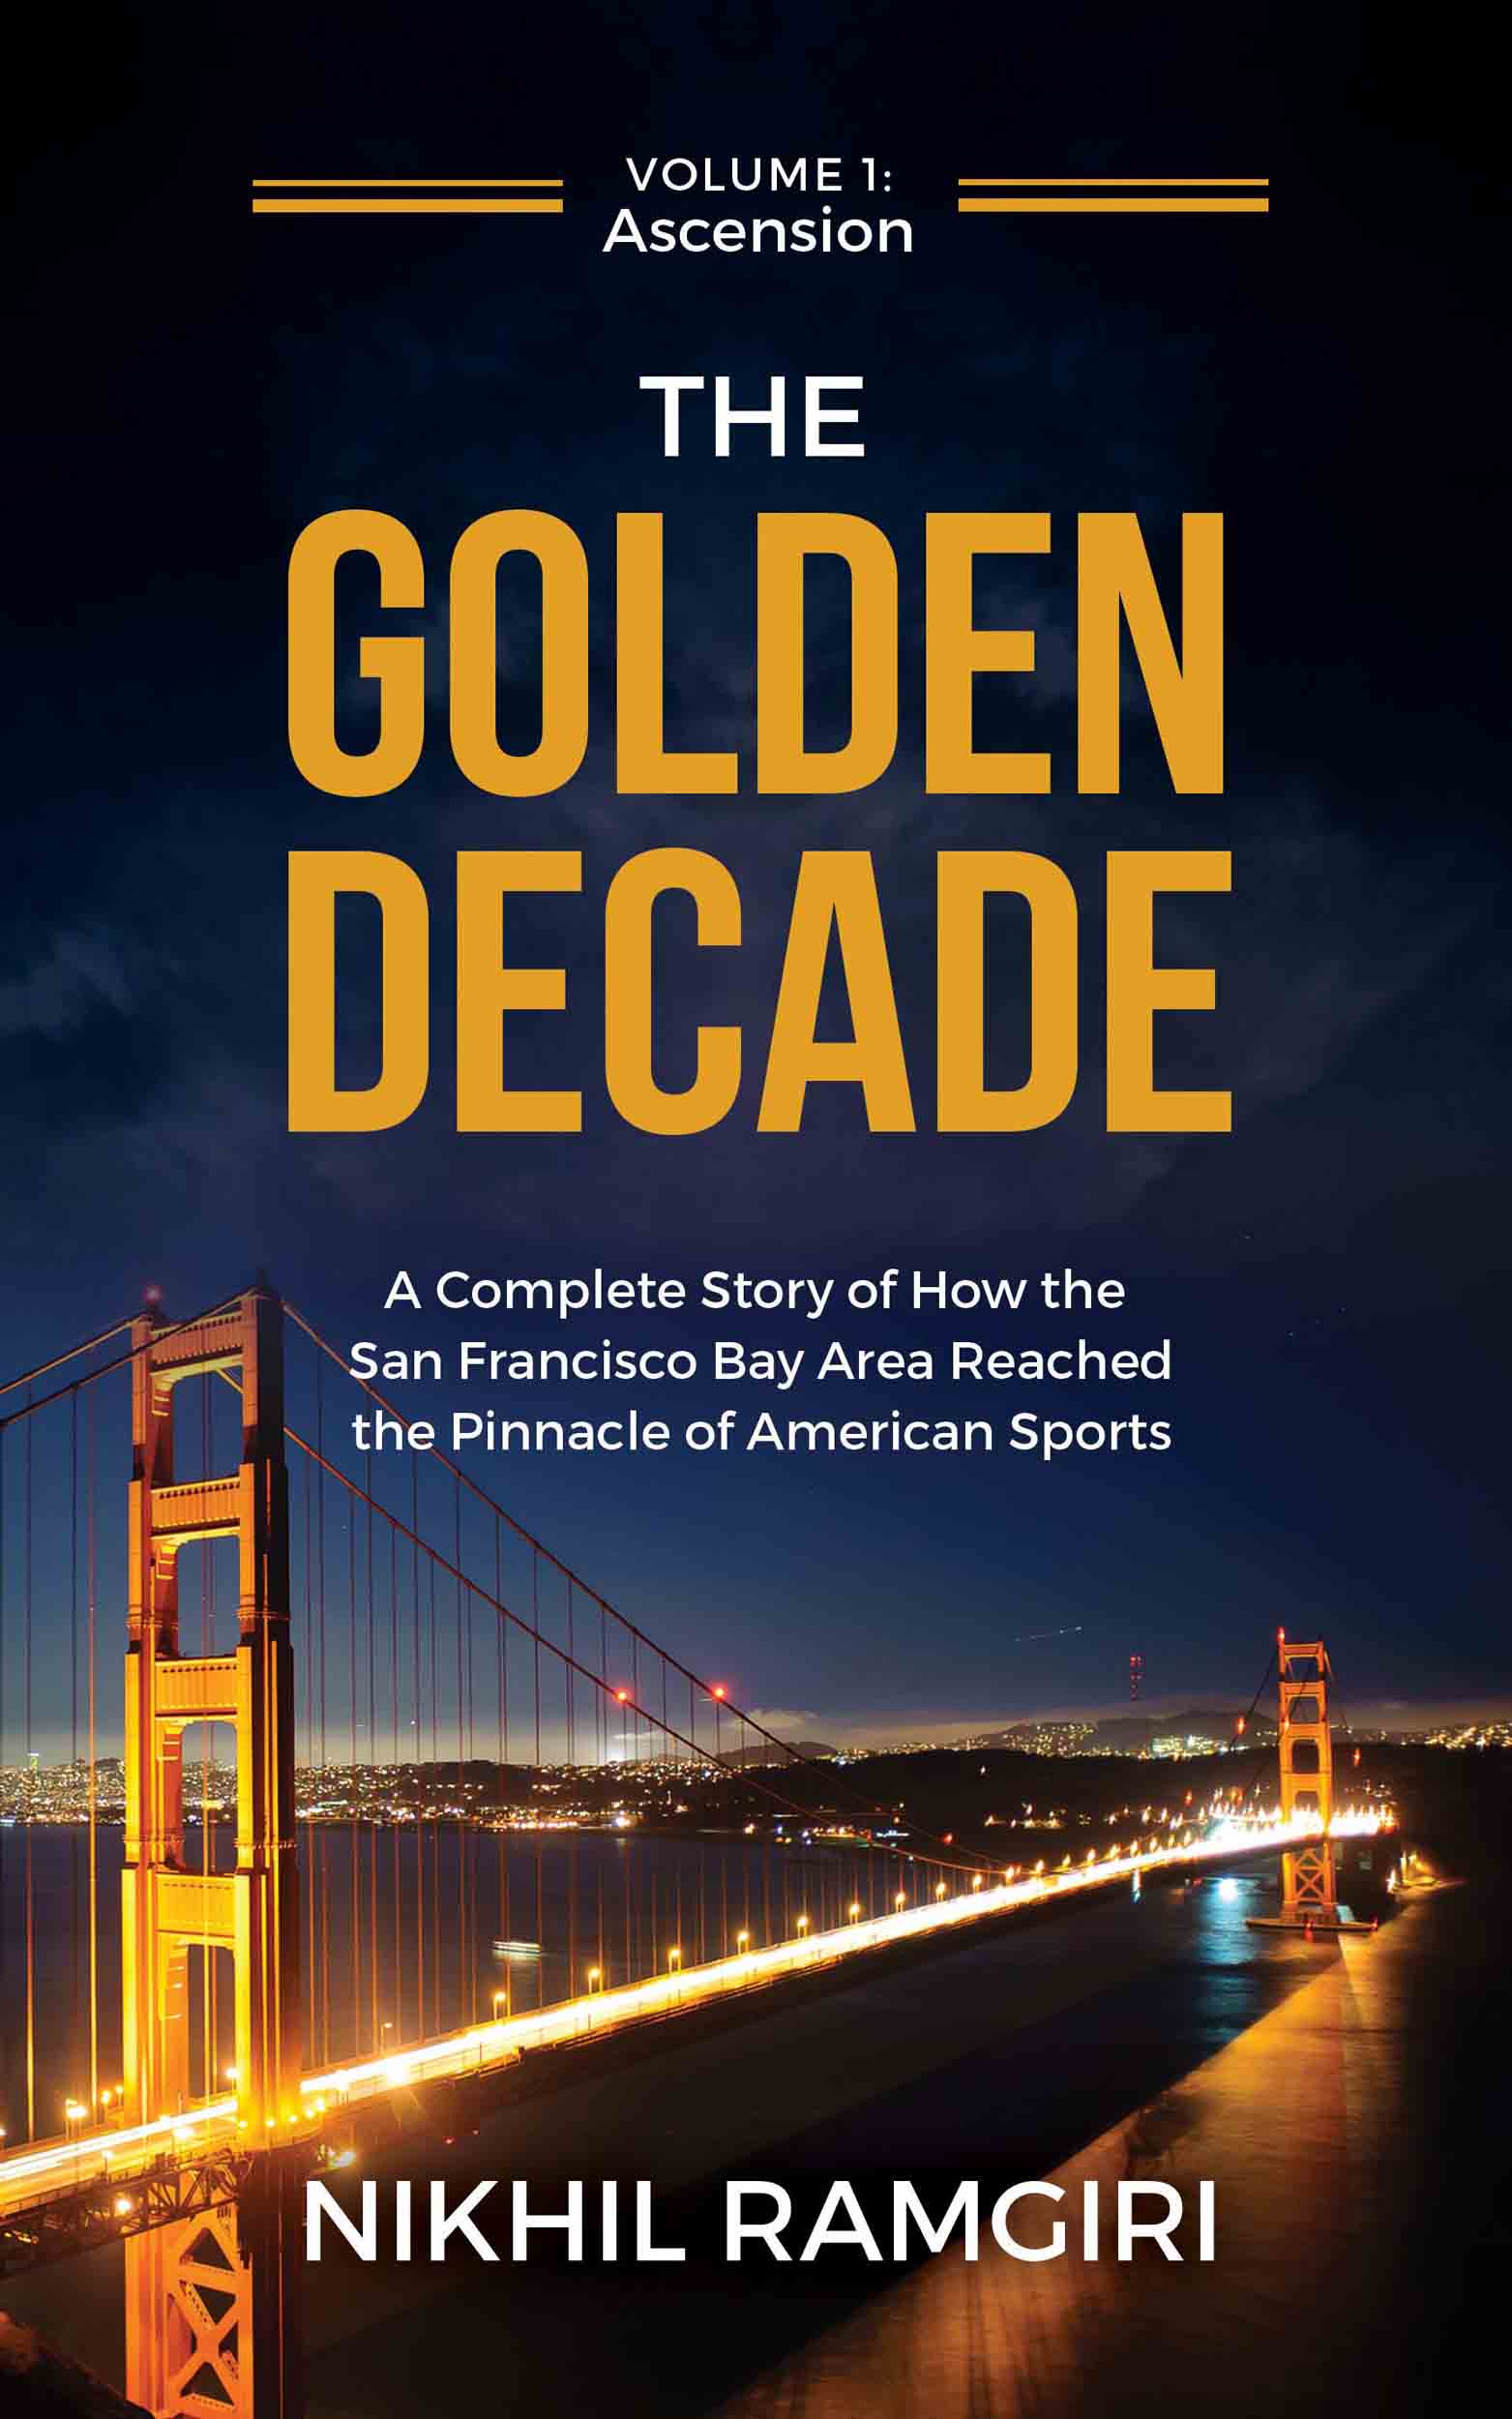 FREE: The Golden Decade: A Complete Story of How the San Francisco Bay Area Reached the Pinnacle of American Sports by Nikhil Ramgiri